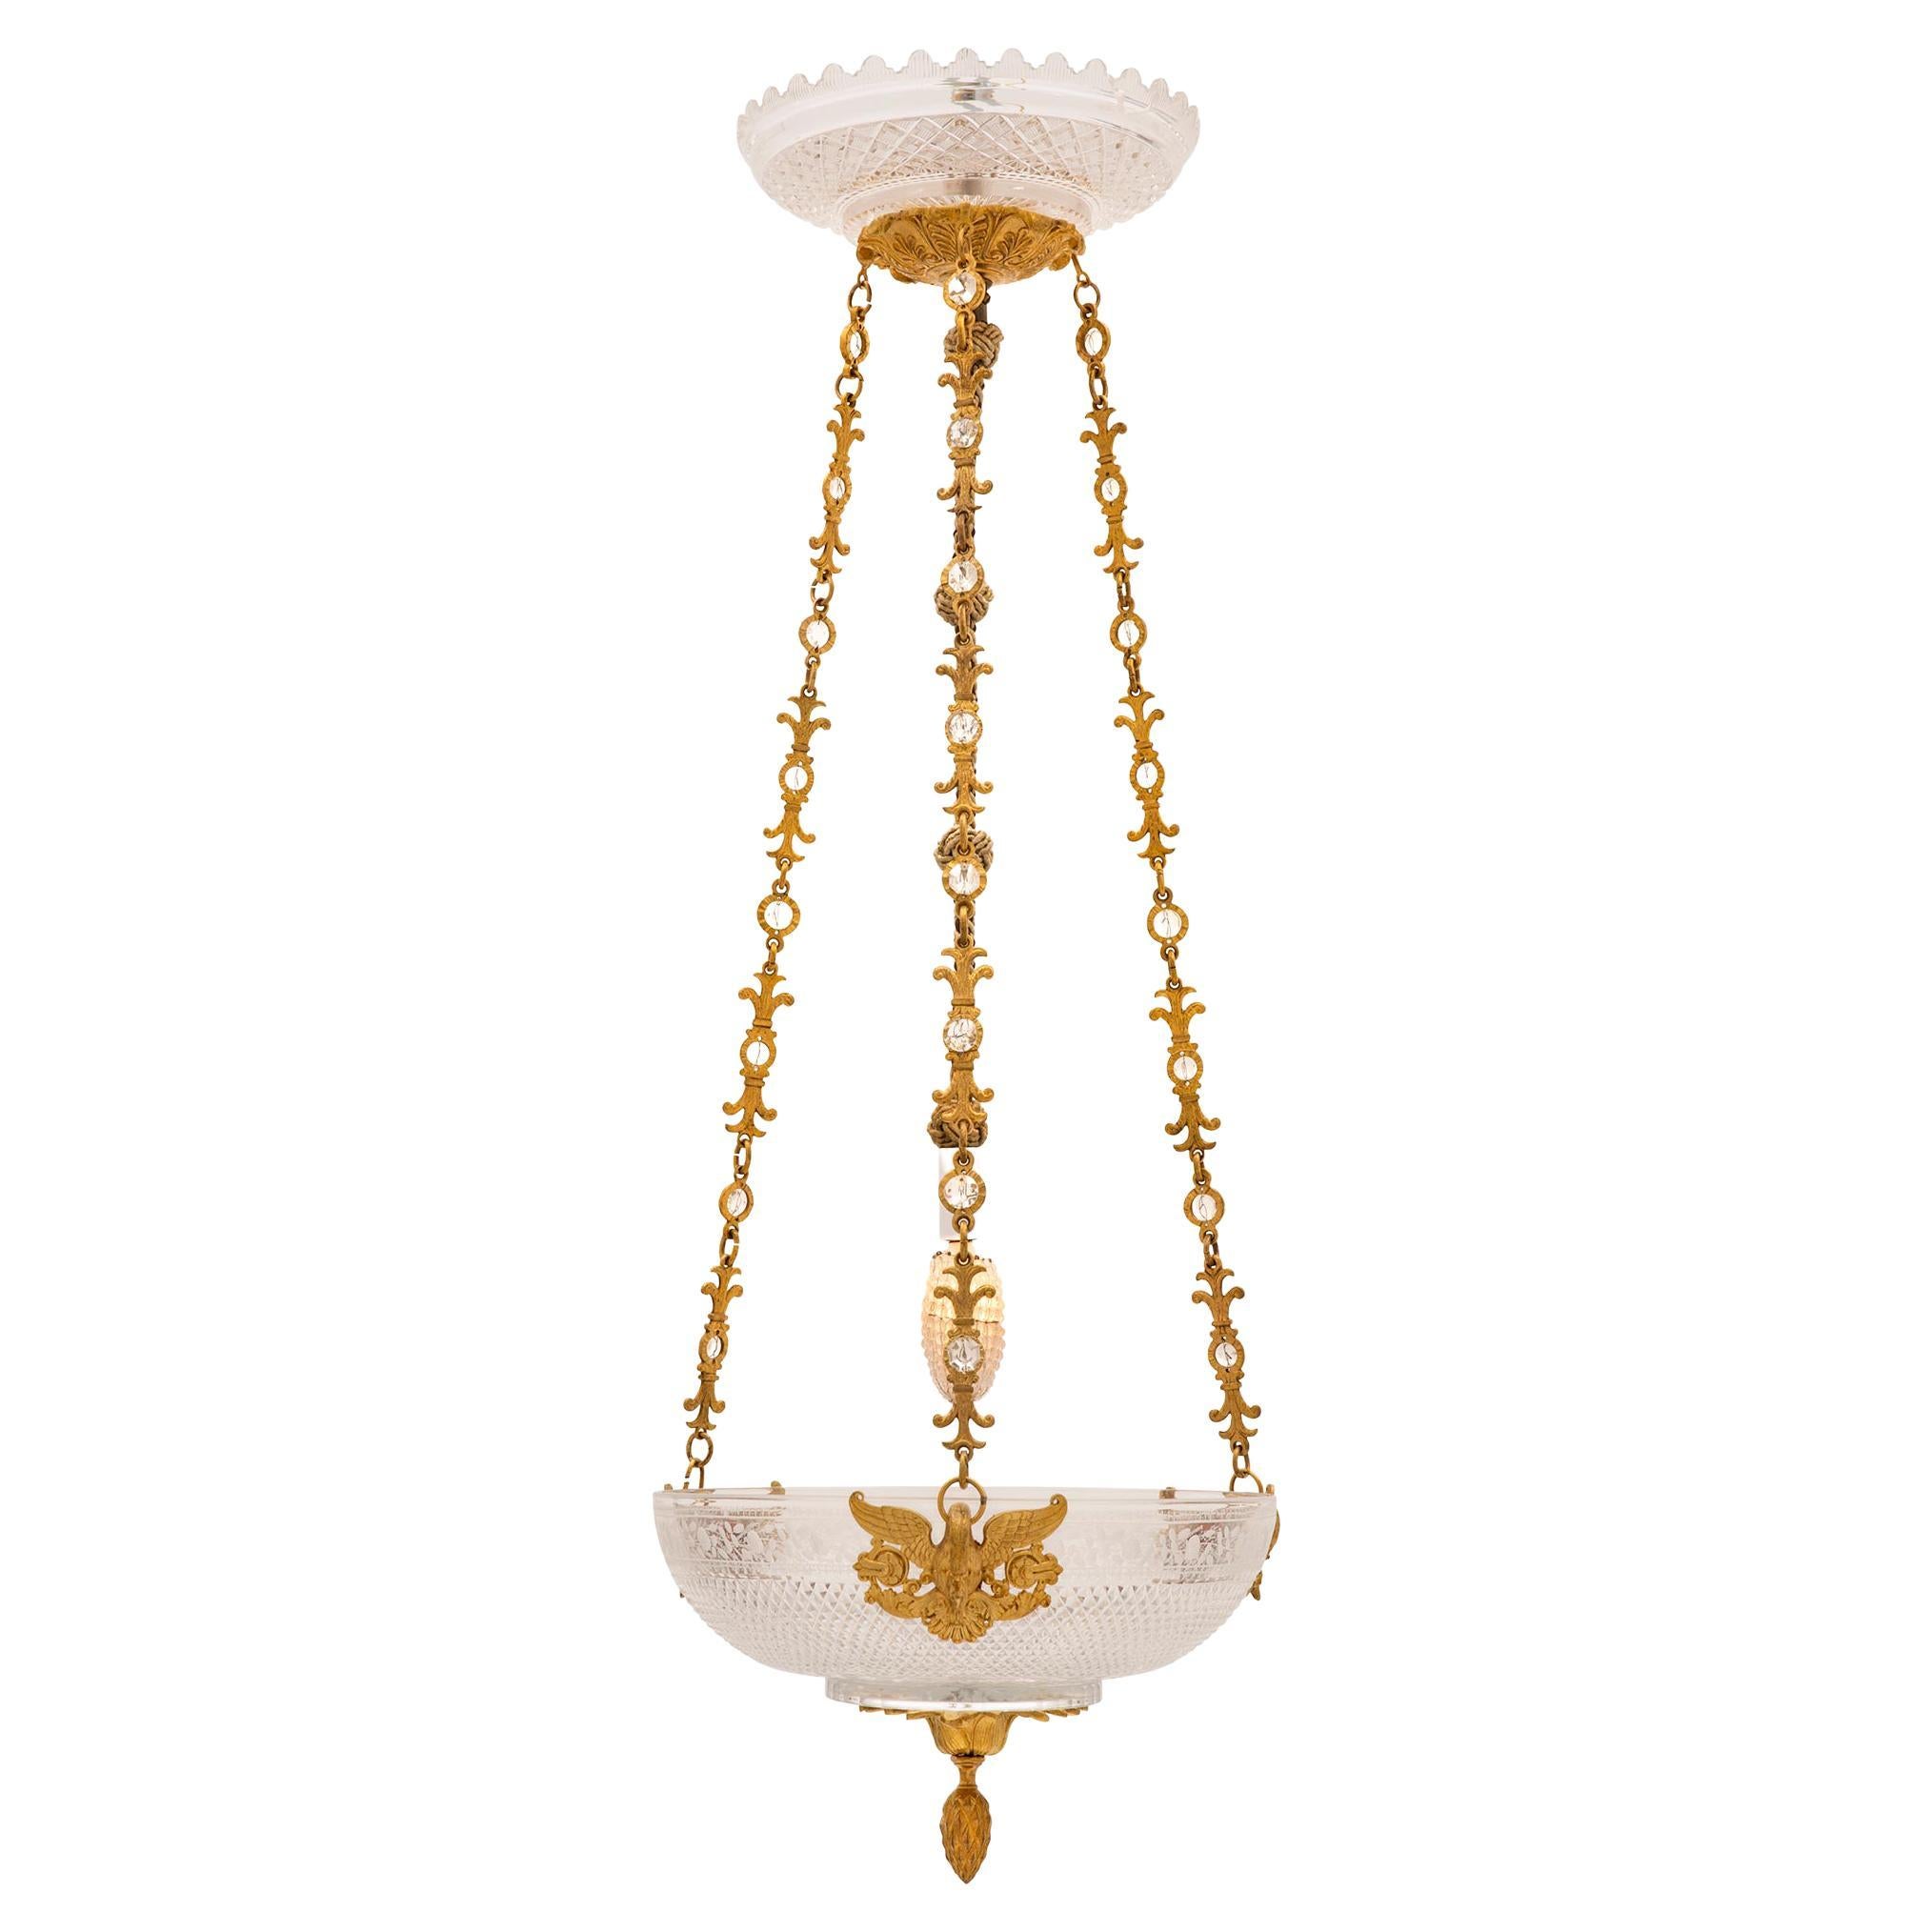 French Early 19th Century 1st Empire Period Baccarat Crystal & Ormolu Chandelier